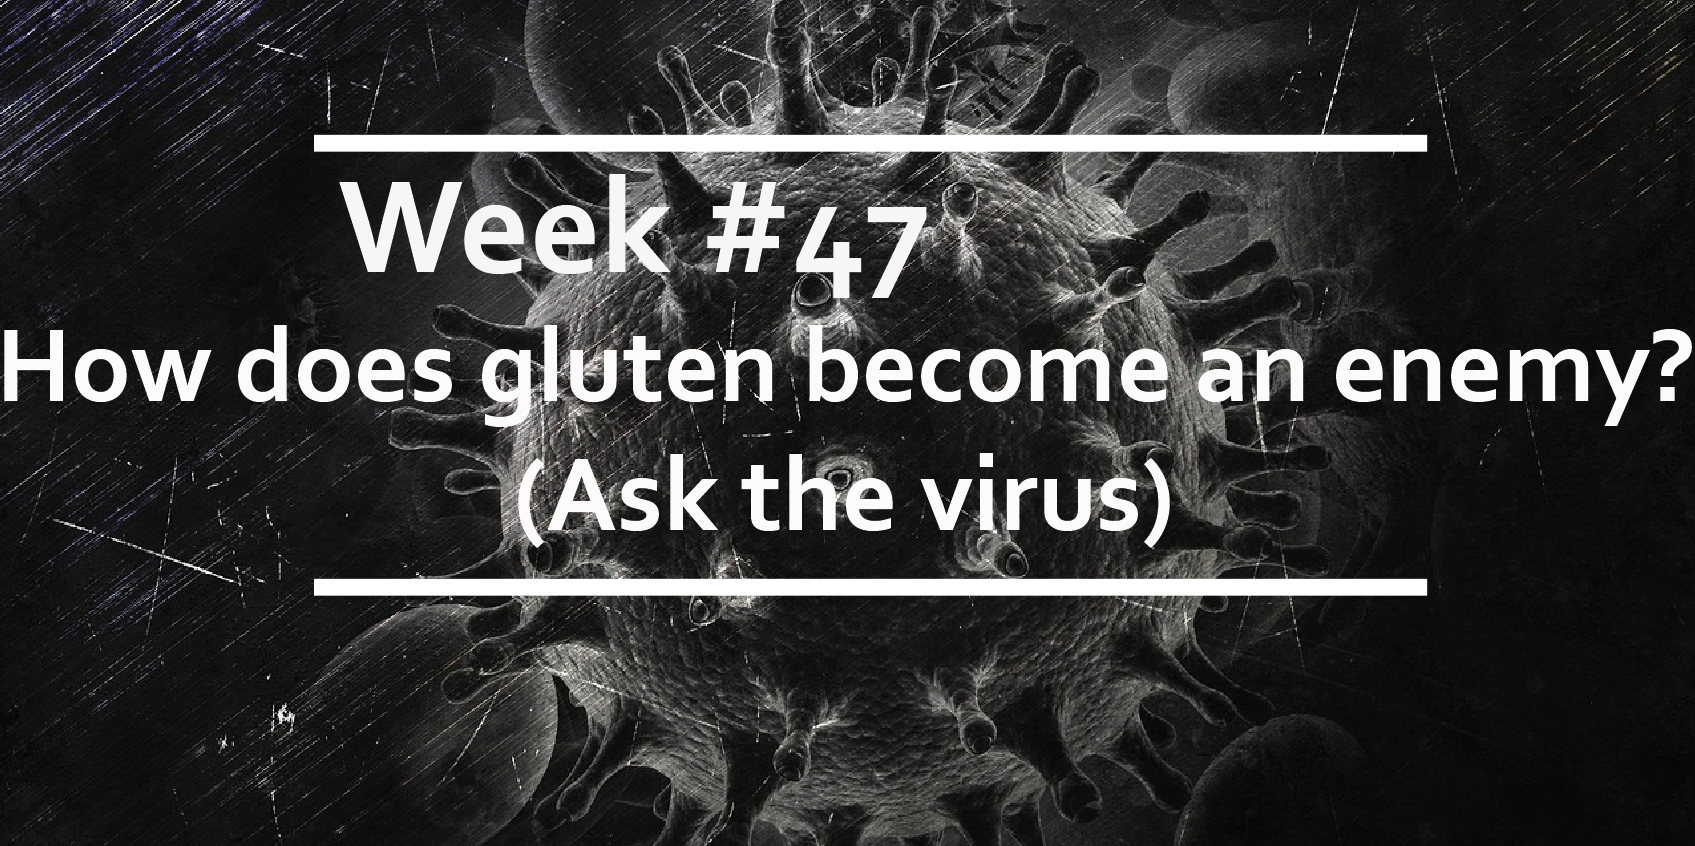 How does gluten become an enemy? (Ask the virus)